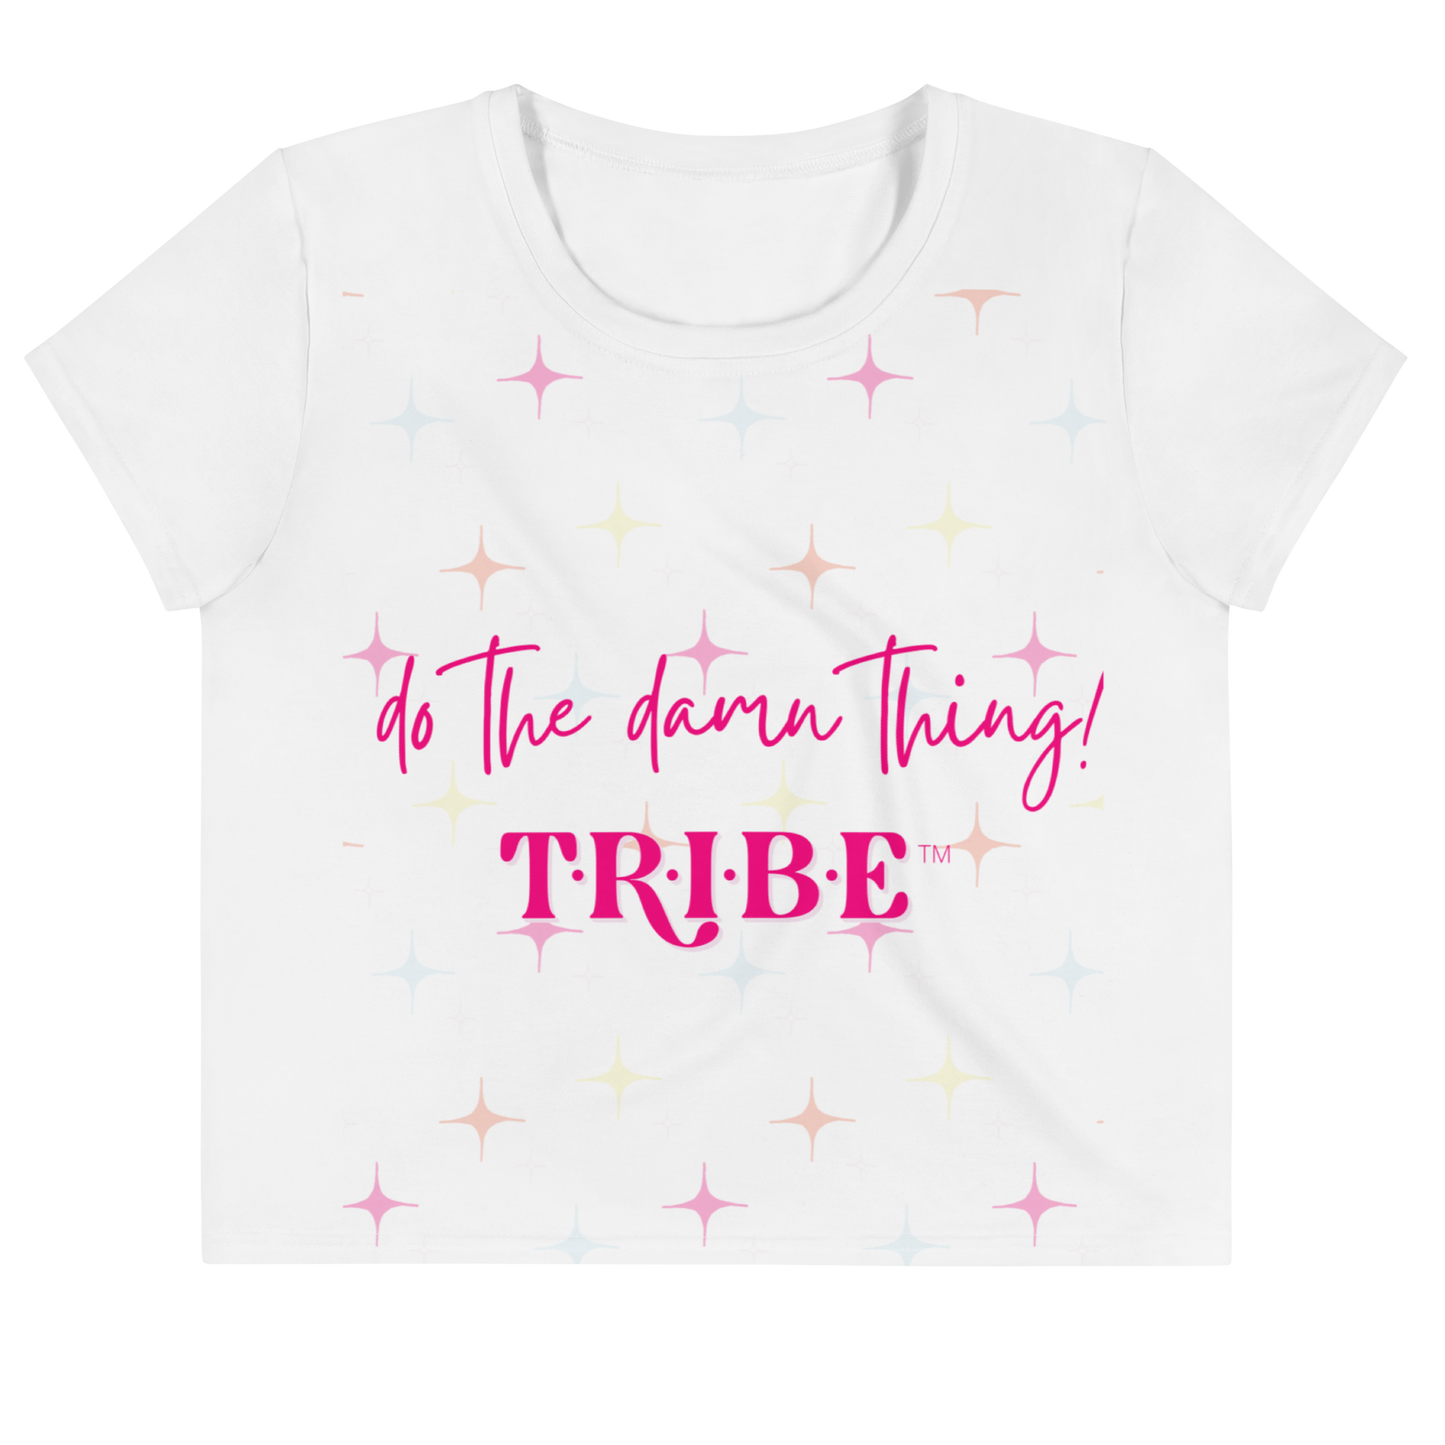 TRIBE CROP TOP - DO THE DAMN THING